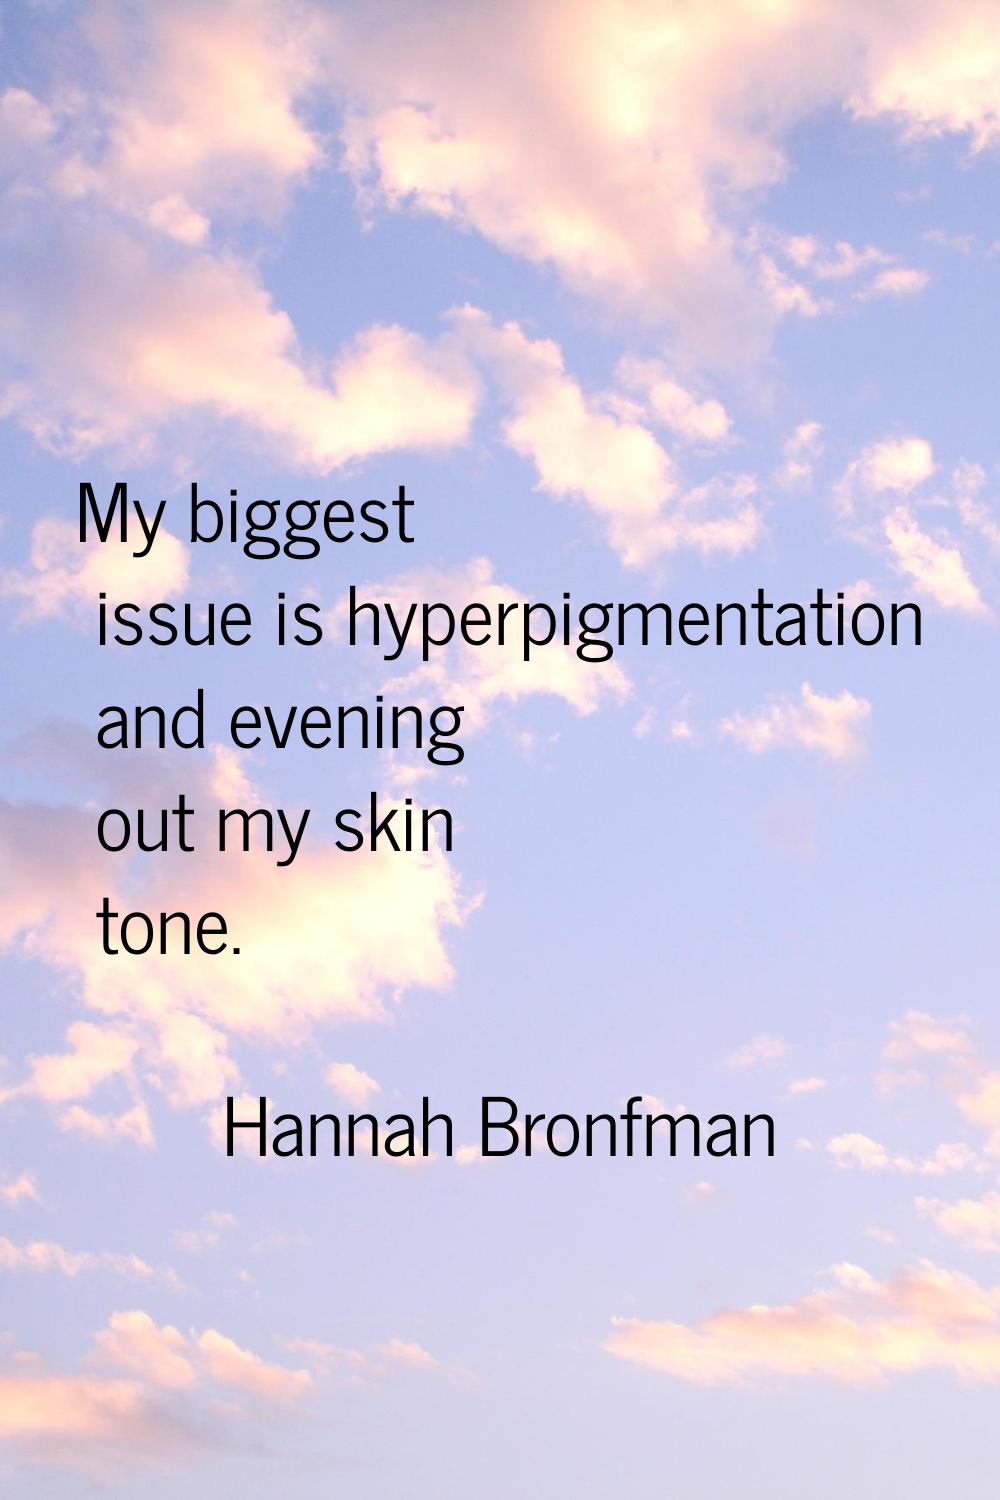 My biggest issue is hyperpigmentation and evening out my skin tone.